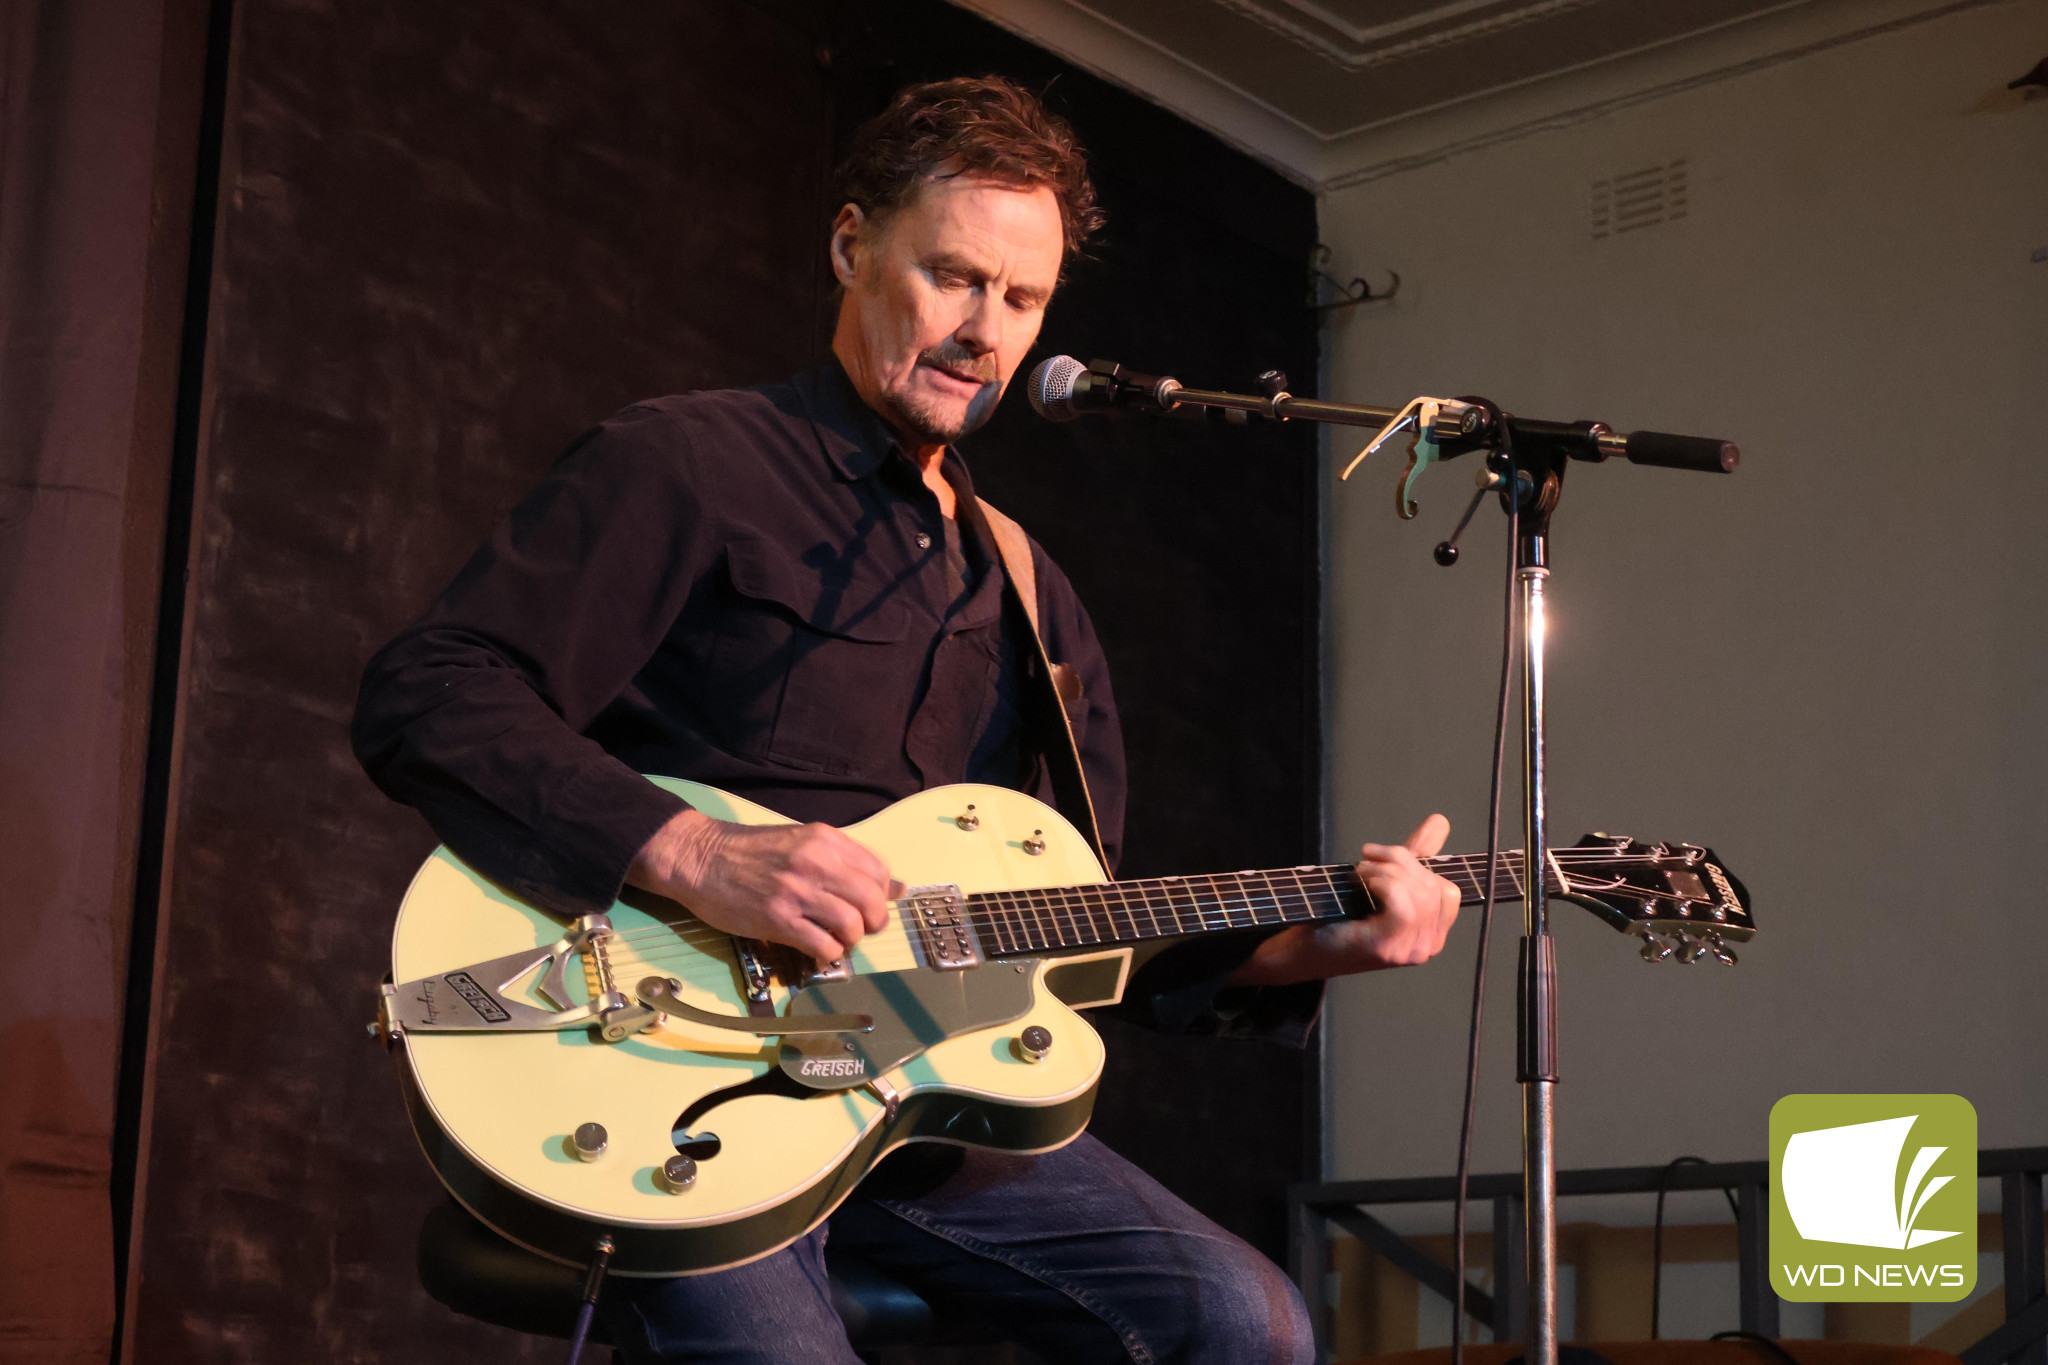 Taking the stage: Acclaimed Australian musician Neil Murray brought his talents to Terang last week, filling the Commercial Hotel for a highly-anticipated performance